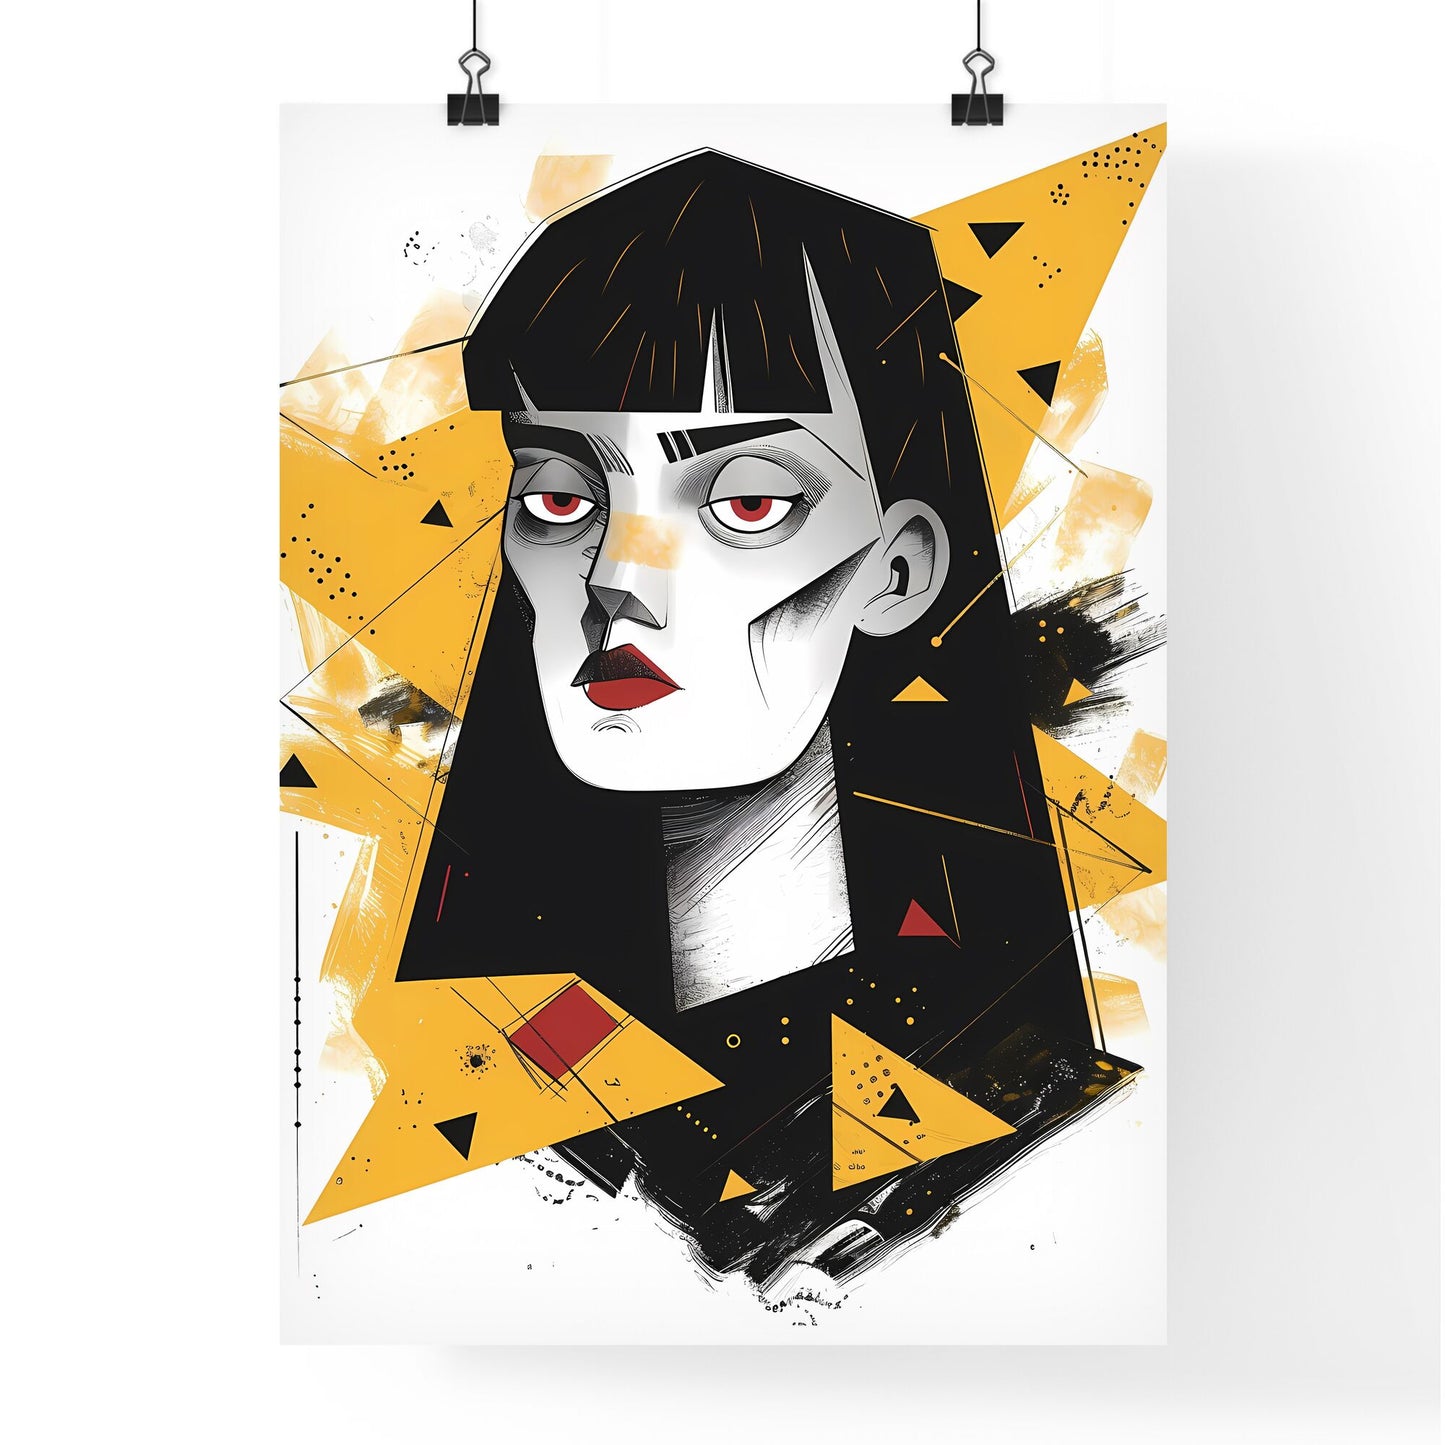 Boldly Grotesque Cartoon of Red-Eyed, Black-Haired Girl with Vibrant Yellow Triangles Default Title